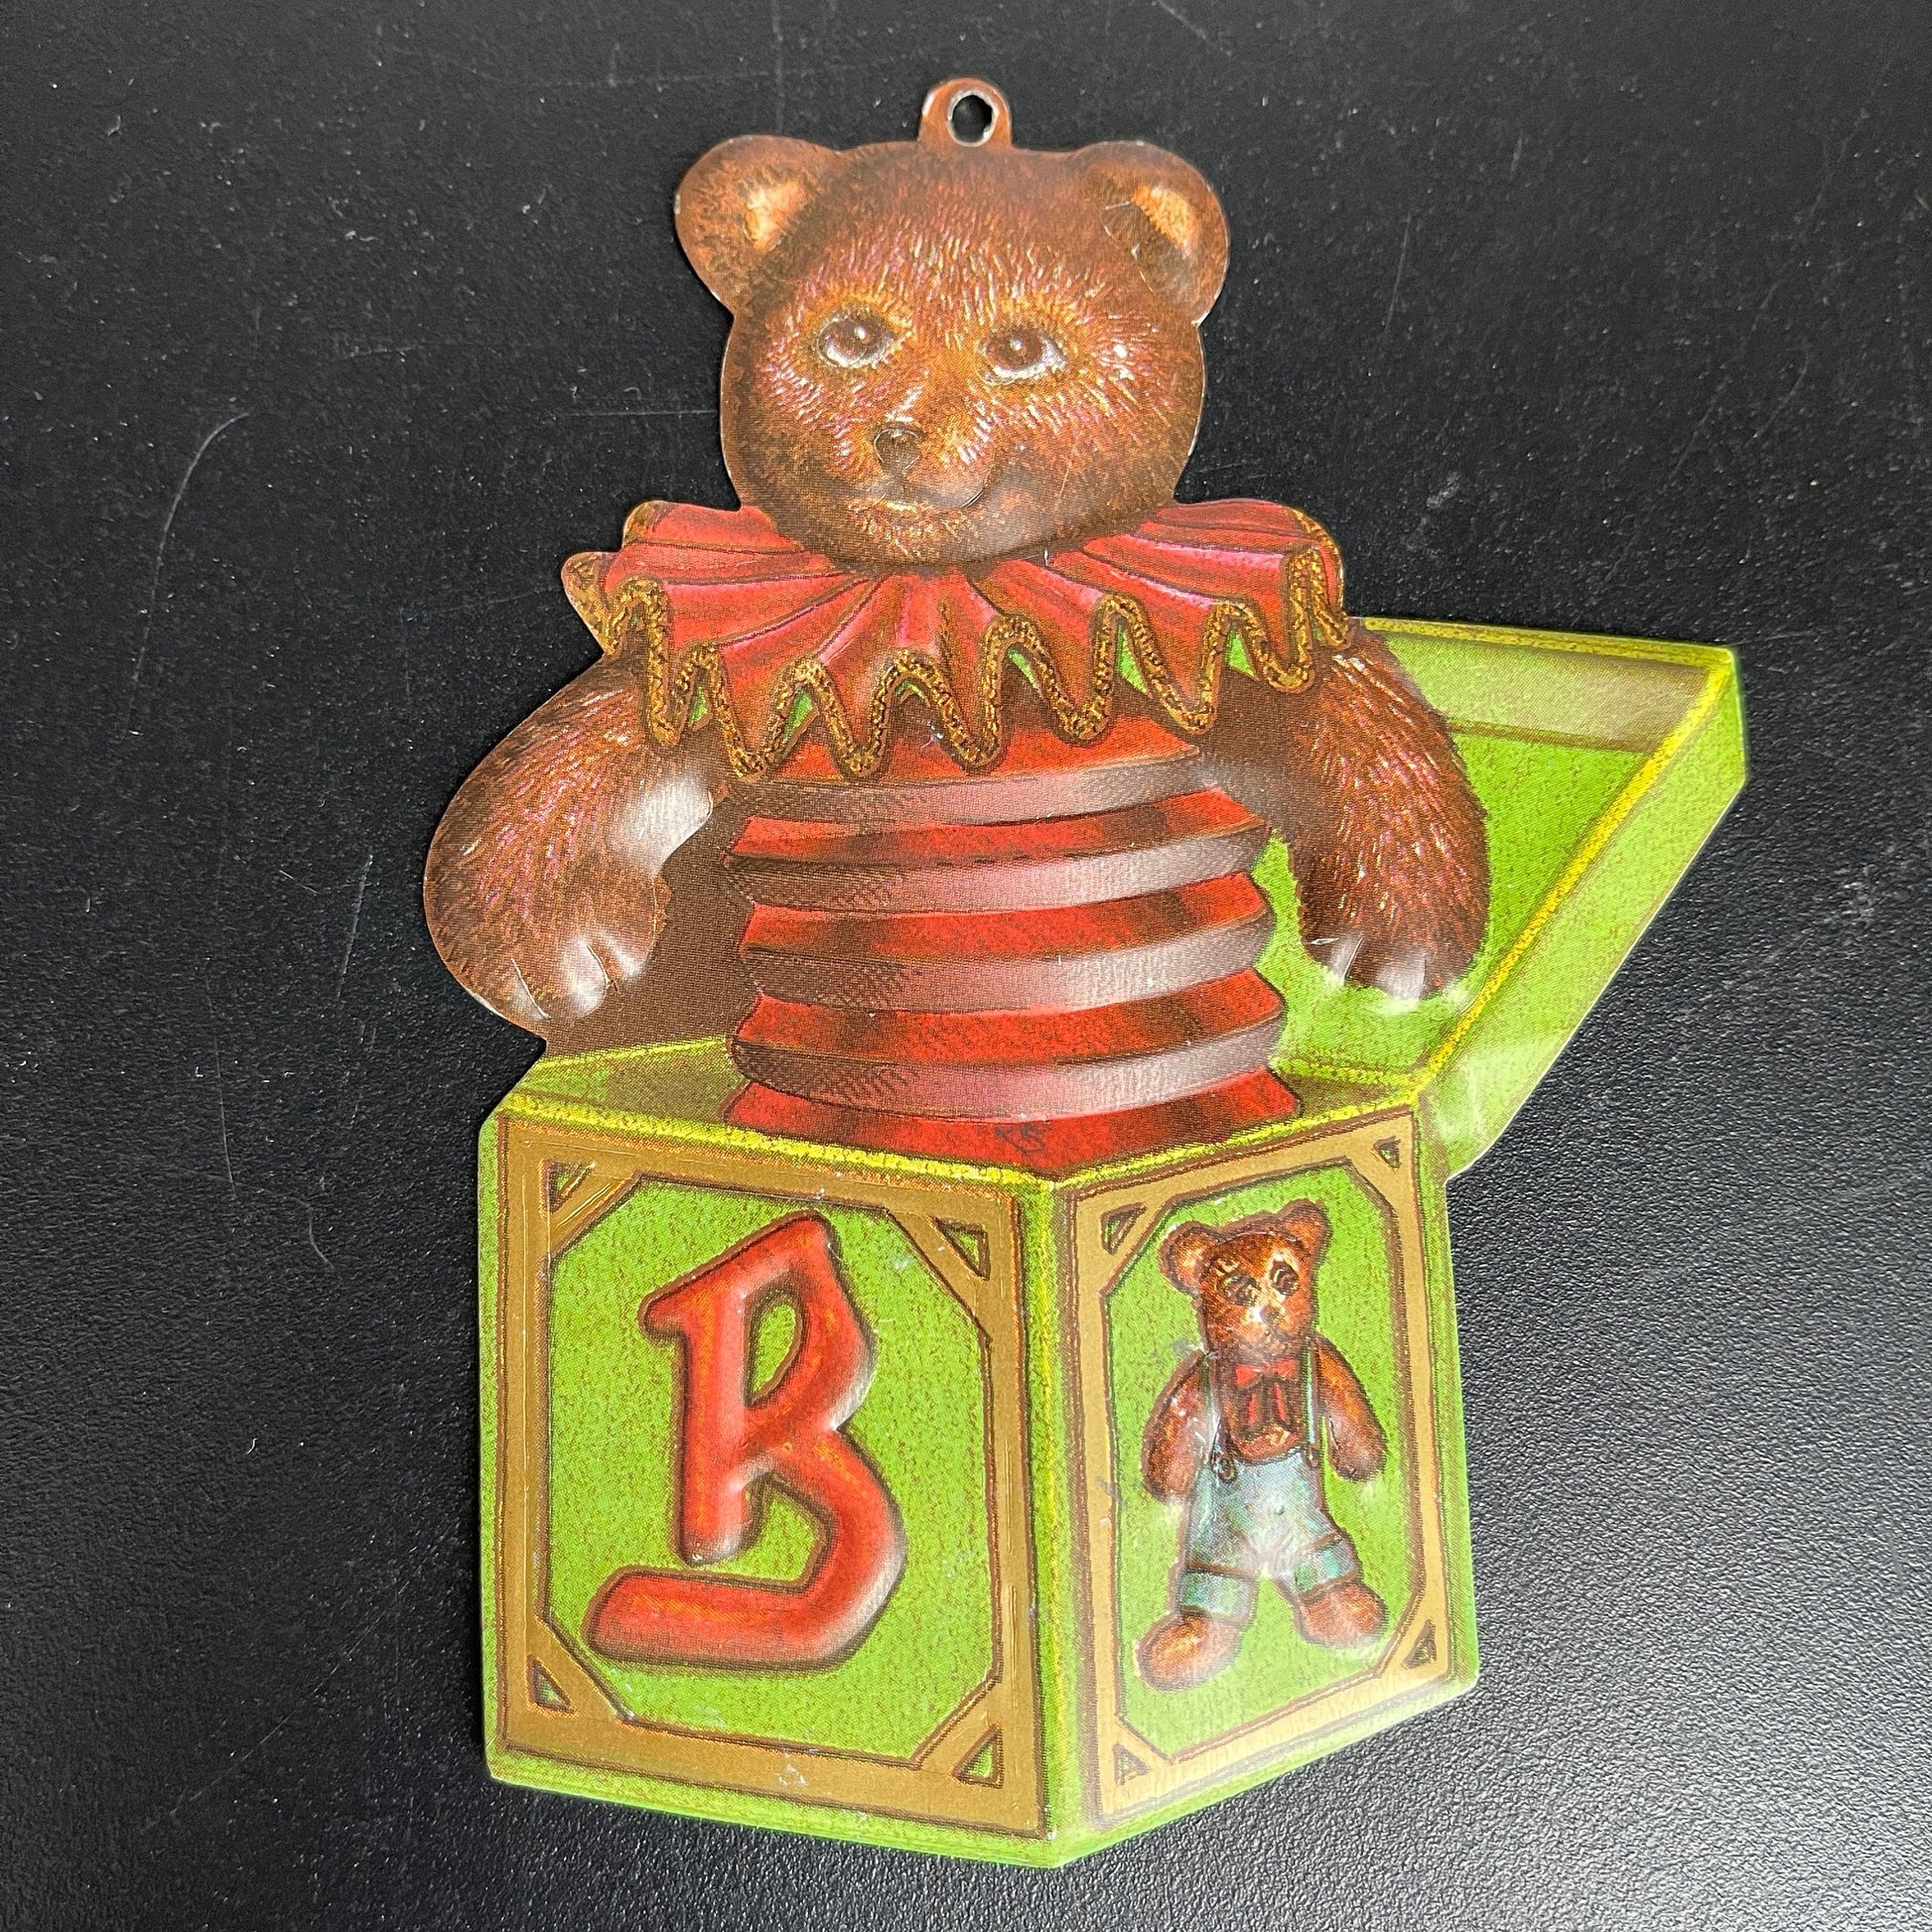 Department 56 Teddy Bear Jack in the Box Metal vintage collectible Christmas ornament